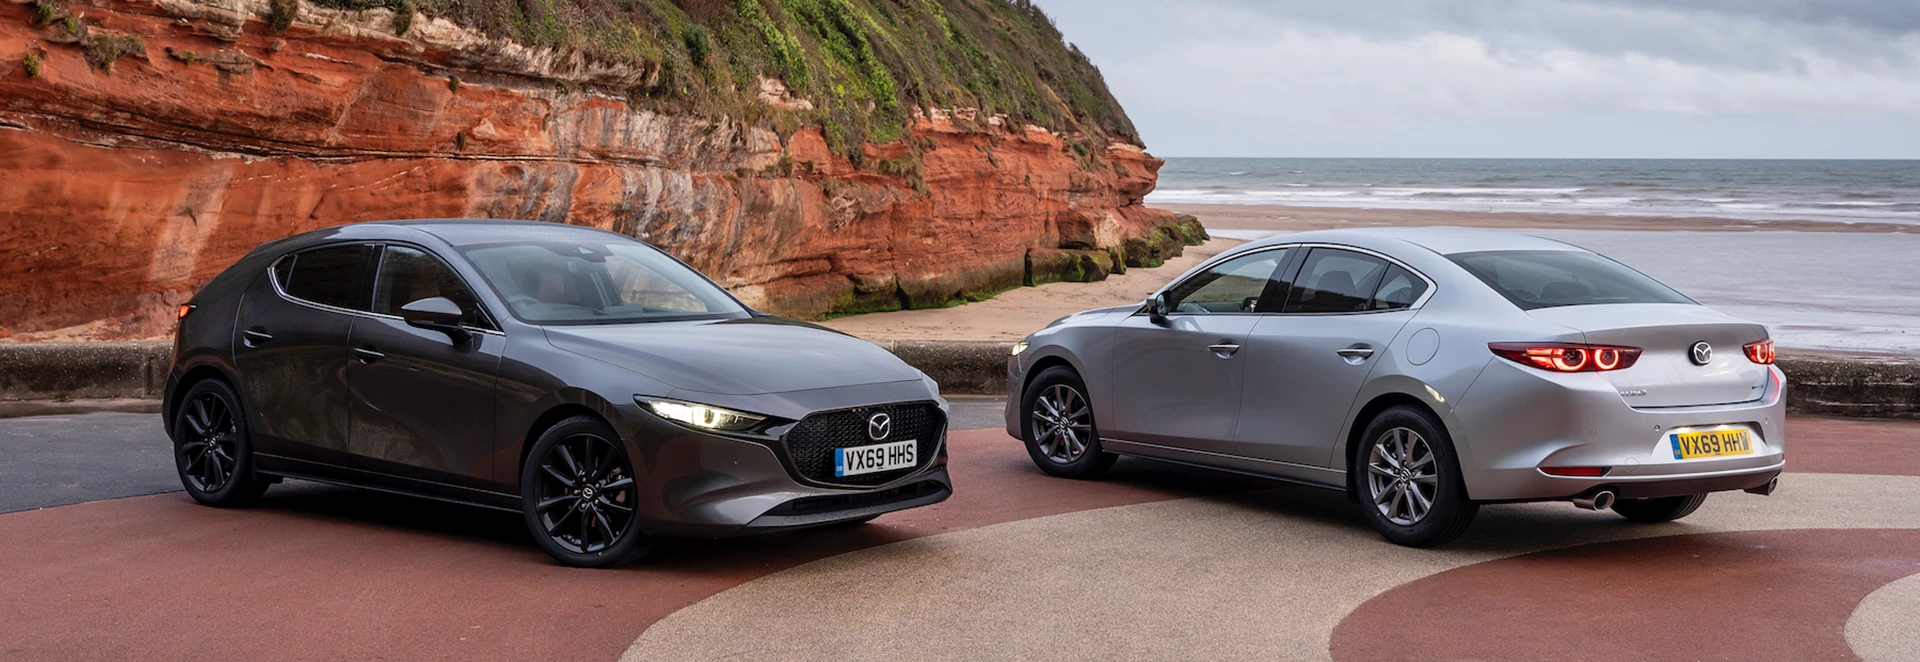 Here’s how you could save £6,000 off a new Mazda 